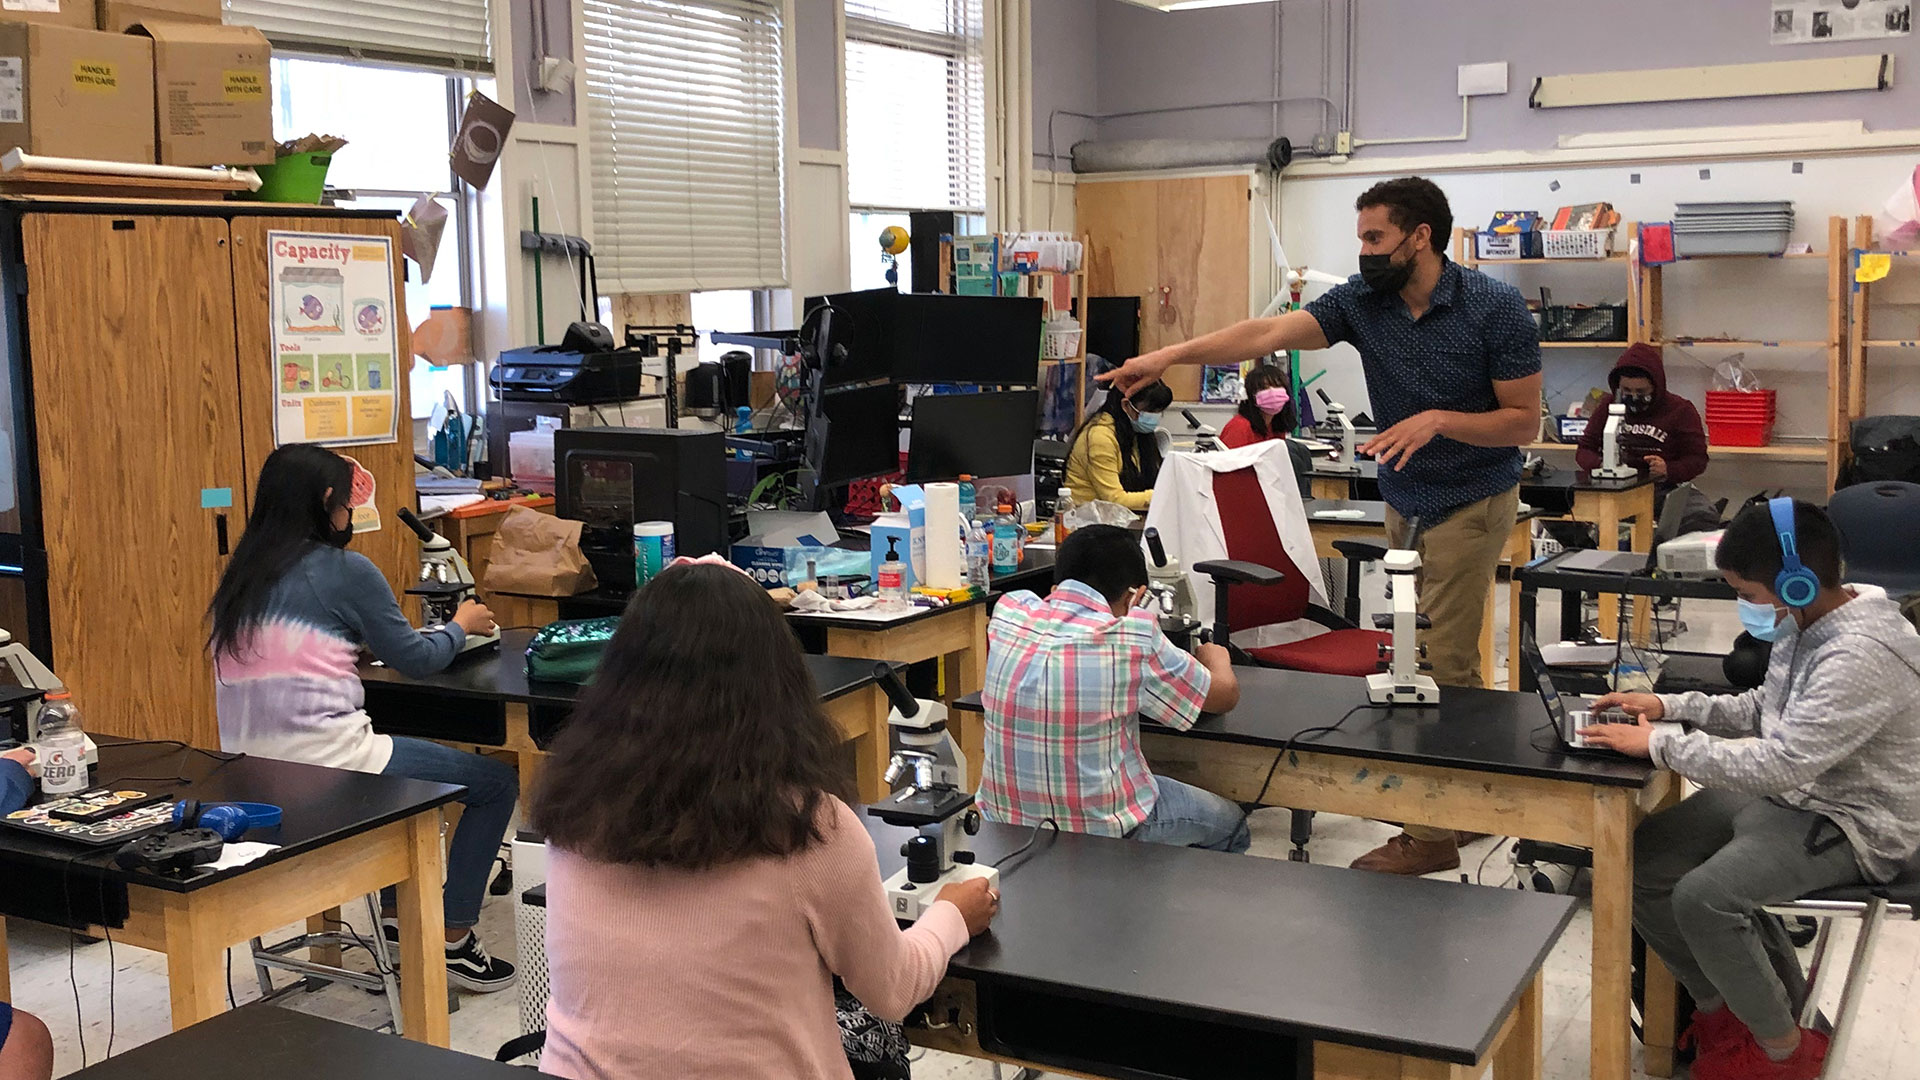 Sixth grade teacher Patrick Messac teaches a science class at Life Academy of Health and Bioscience in East Oakland. Students are studying the health impacts of air pollution and asking questions about their own exposure.